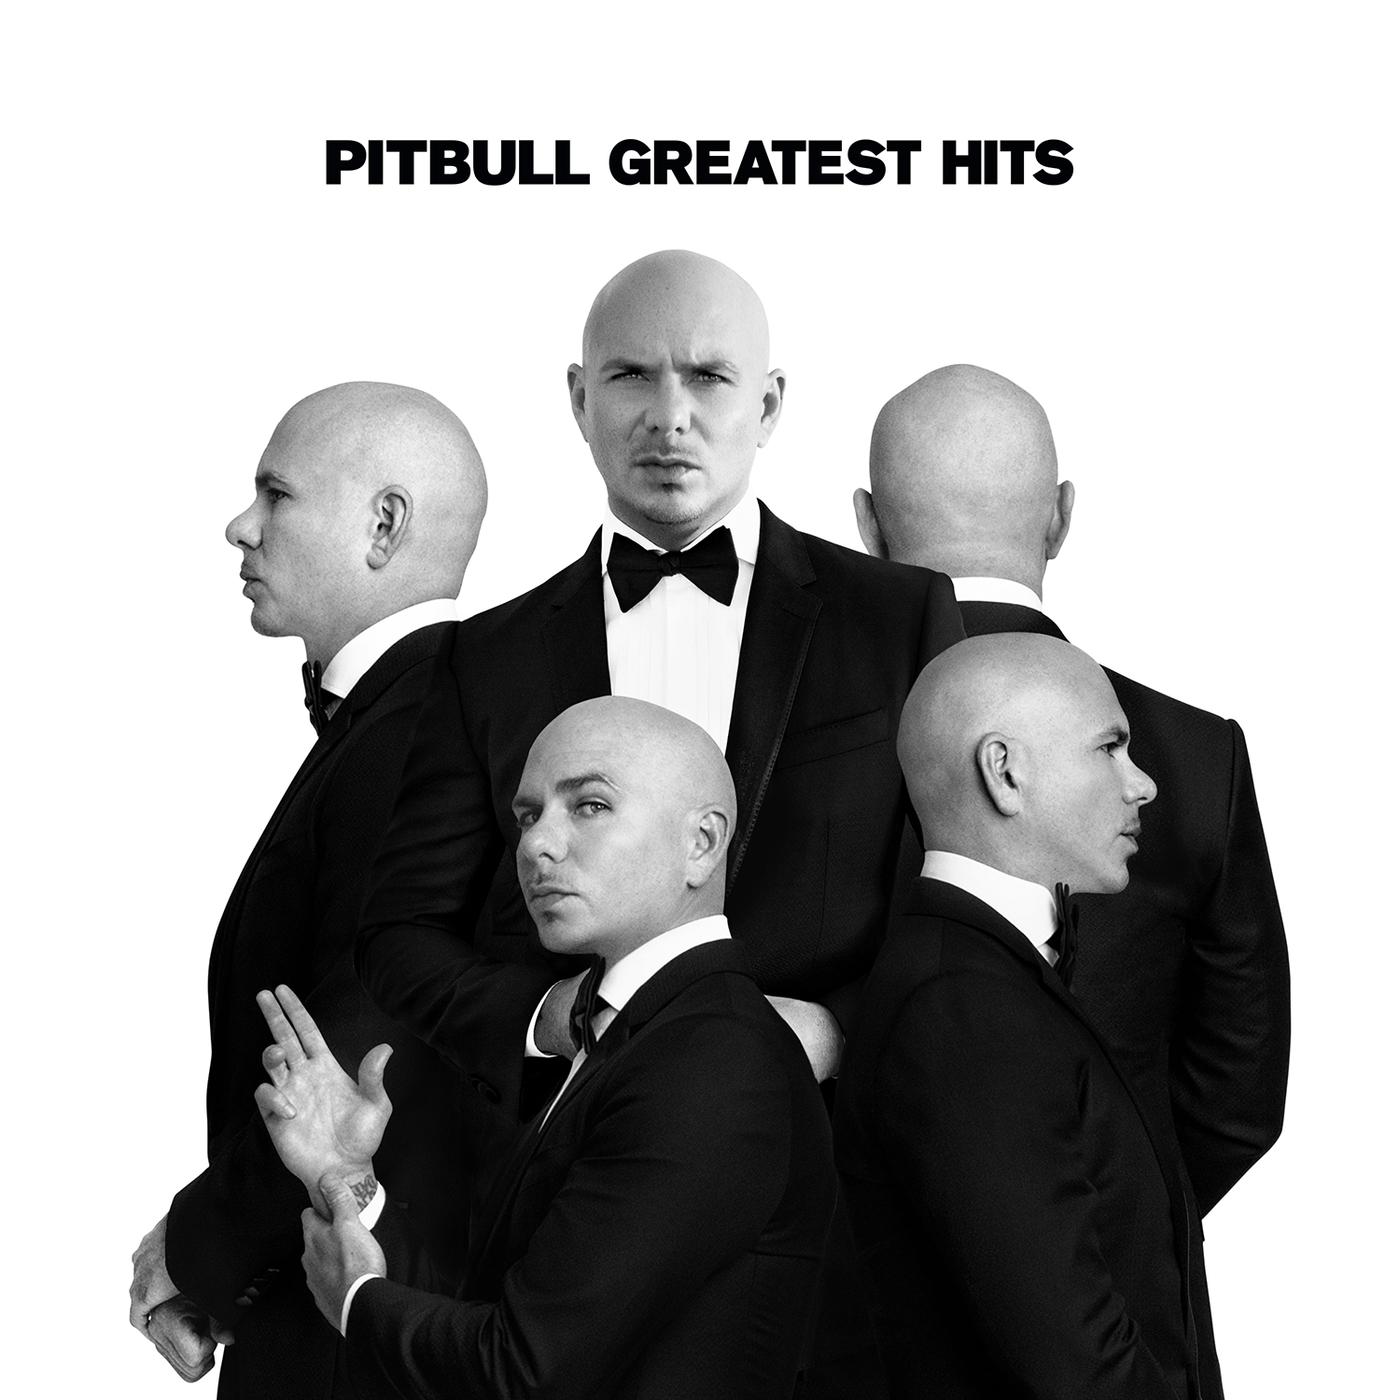 Pitbull - Don't Stop the Party